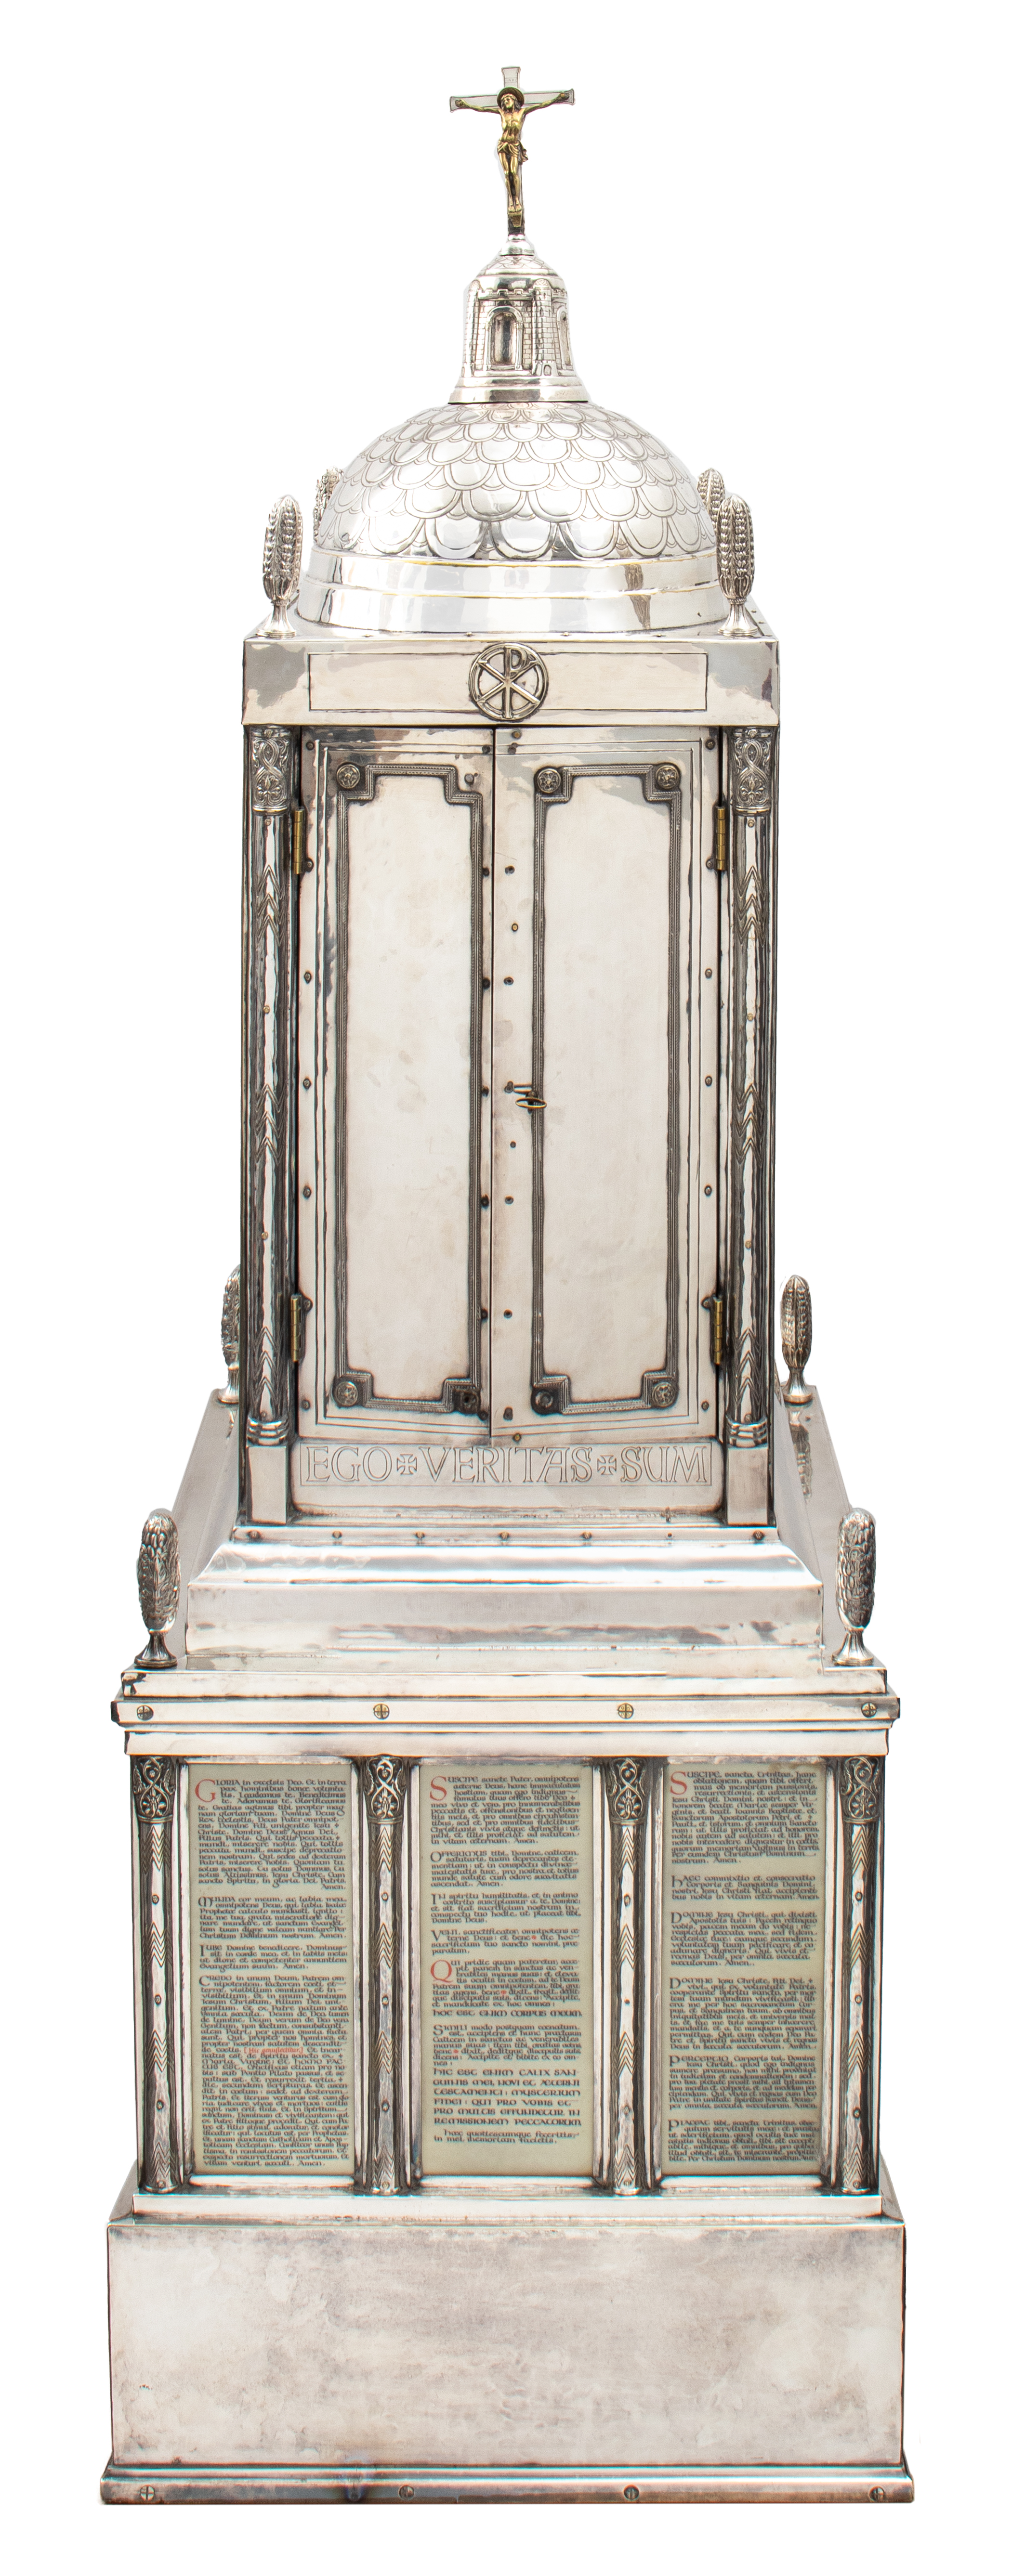 MONUMENTAL SILVERED HOLY TABERNACLE 2be1a9